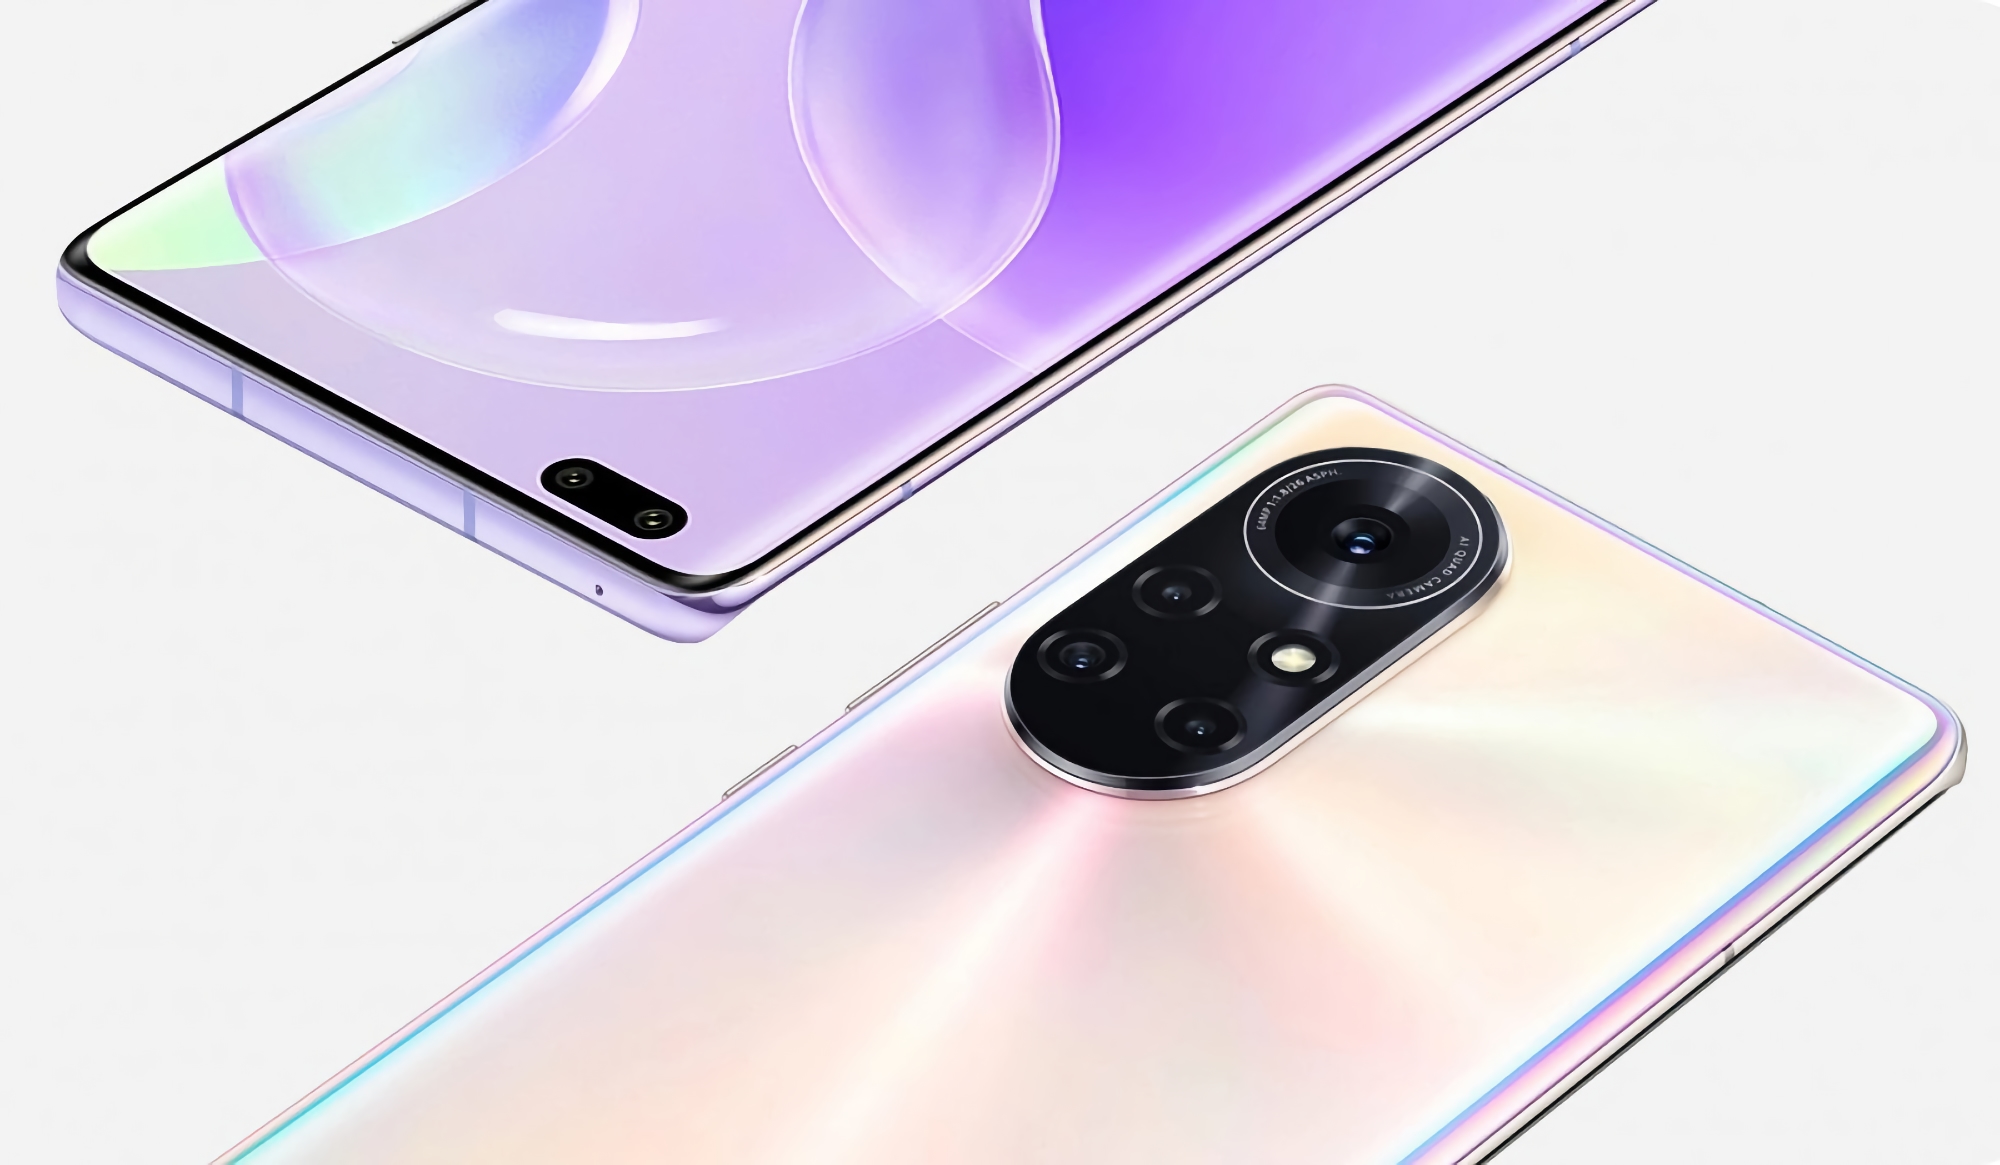 Confirmed: Huawei Nova 9 Pro will get 100W fast charging support